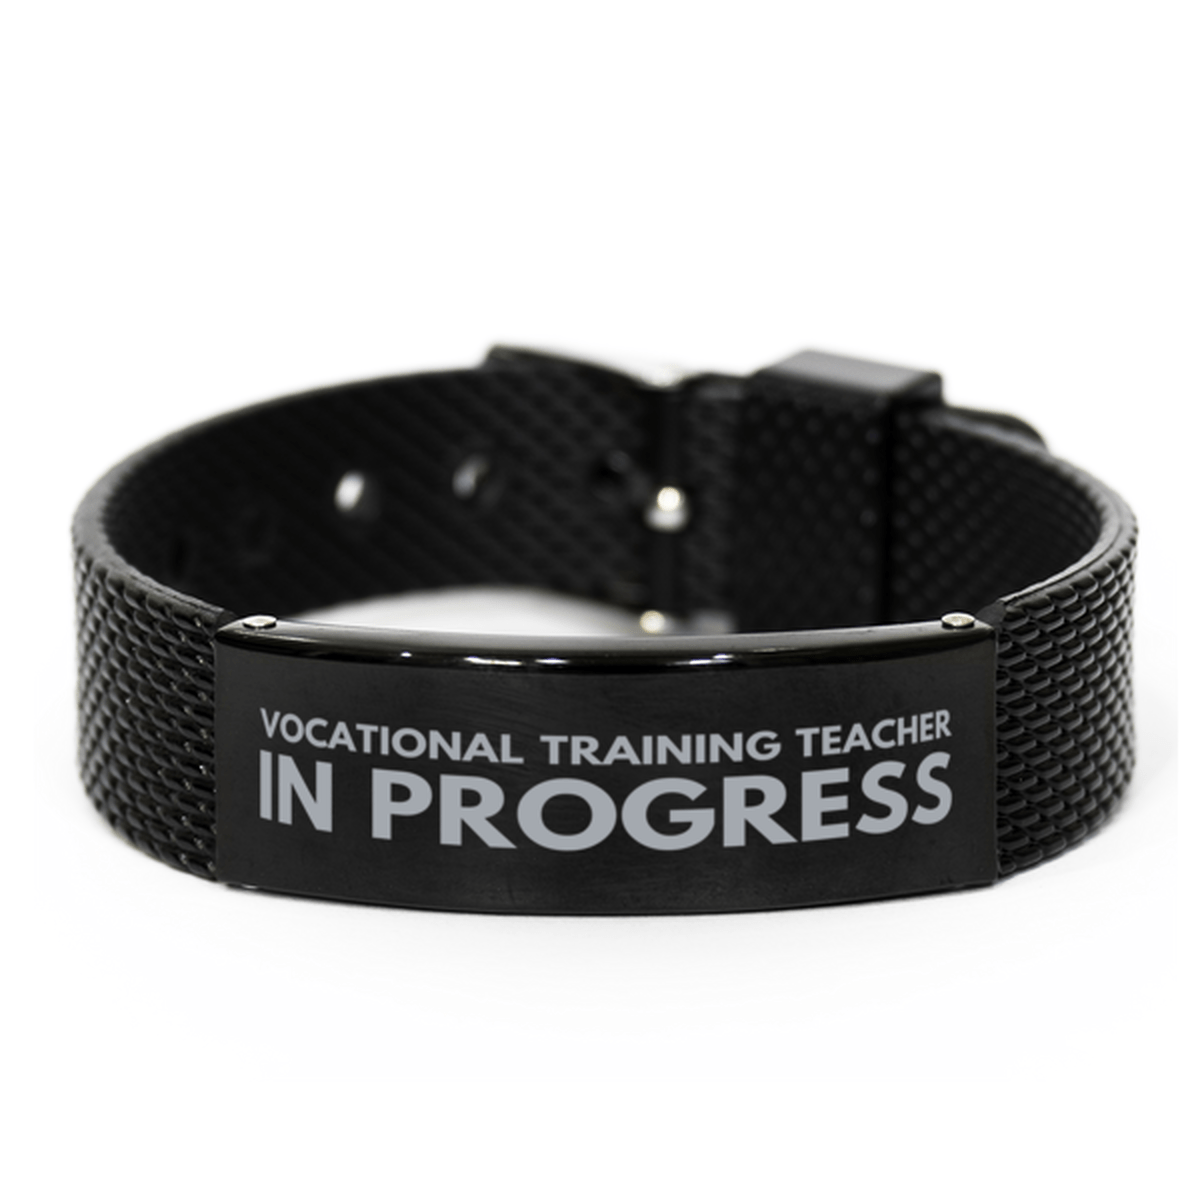 Inspirational Vocational Training Teacher Black Shark Mesh Bracelet, Vocational Training Teacher In Progress, Best Graduation Gifts for Students